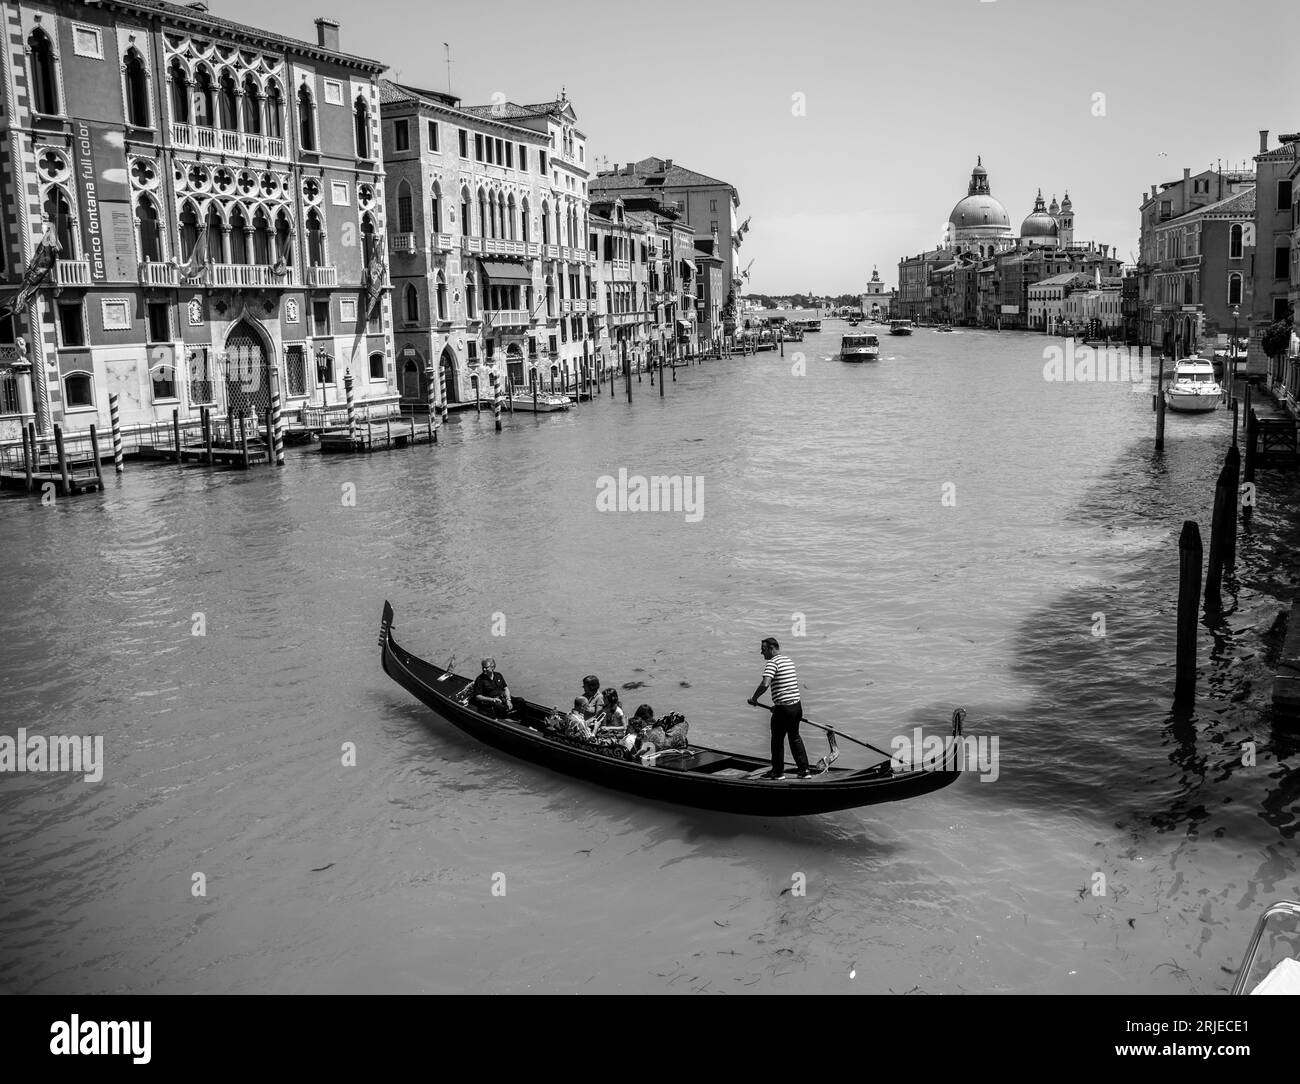 Lone gondola on the Grand Canal in Venice, Italy Stock Photo